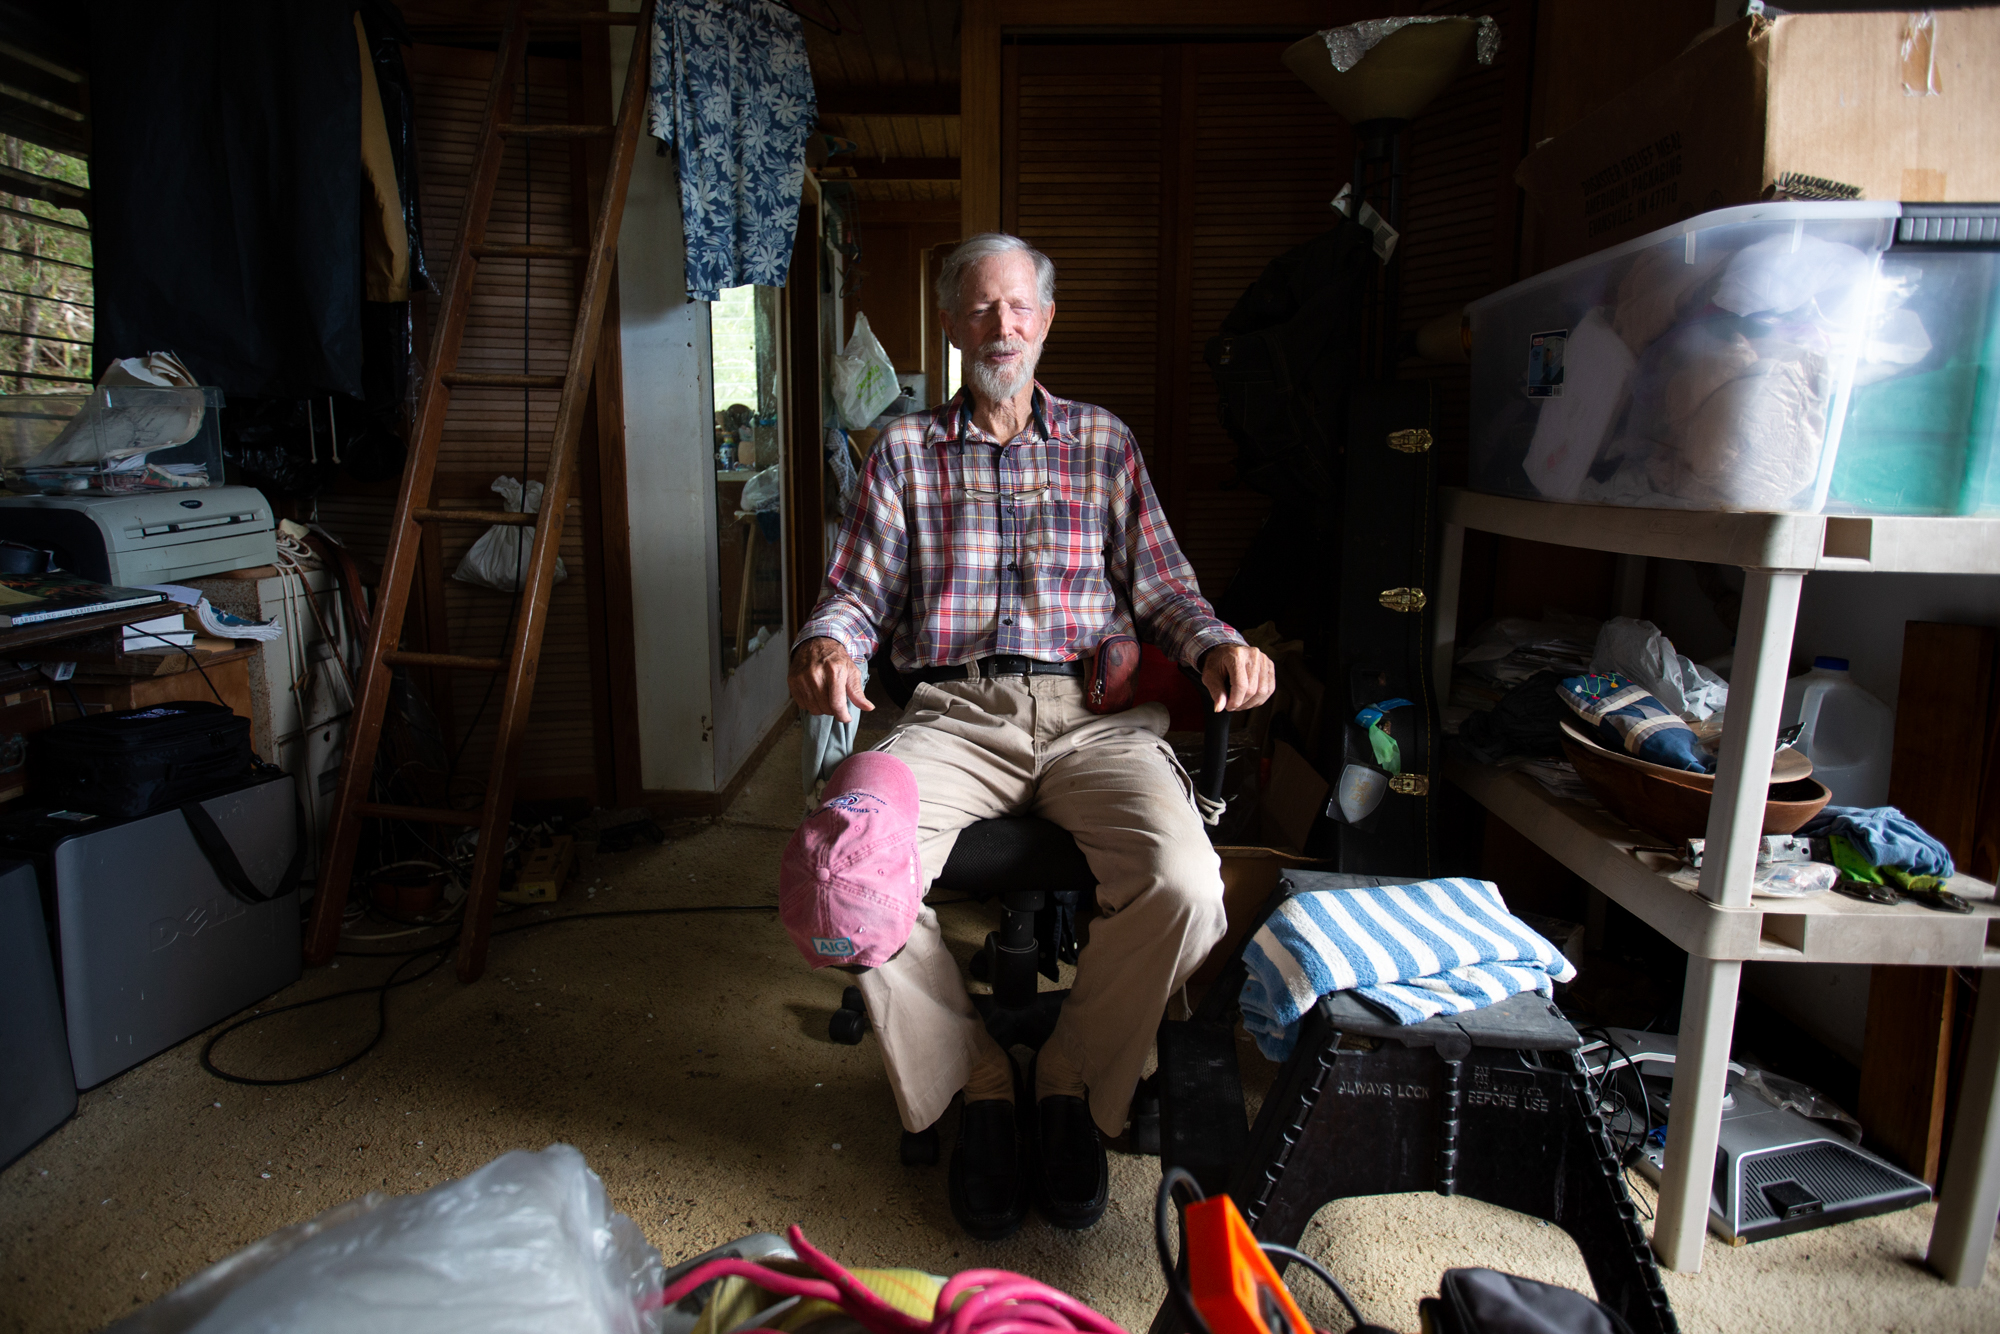 Jim Kerr - Jim Kerr, 78, who is blind and has difficulty hearing, lives alone on St. Thomas in the U.S. Virgin Islands. Kerr went to a shelter during the 2017 hurricane season, but the shelters on the islands were ill-equipped to deal with people who have disabilities. (Anya Magnuson/News21)